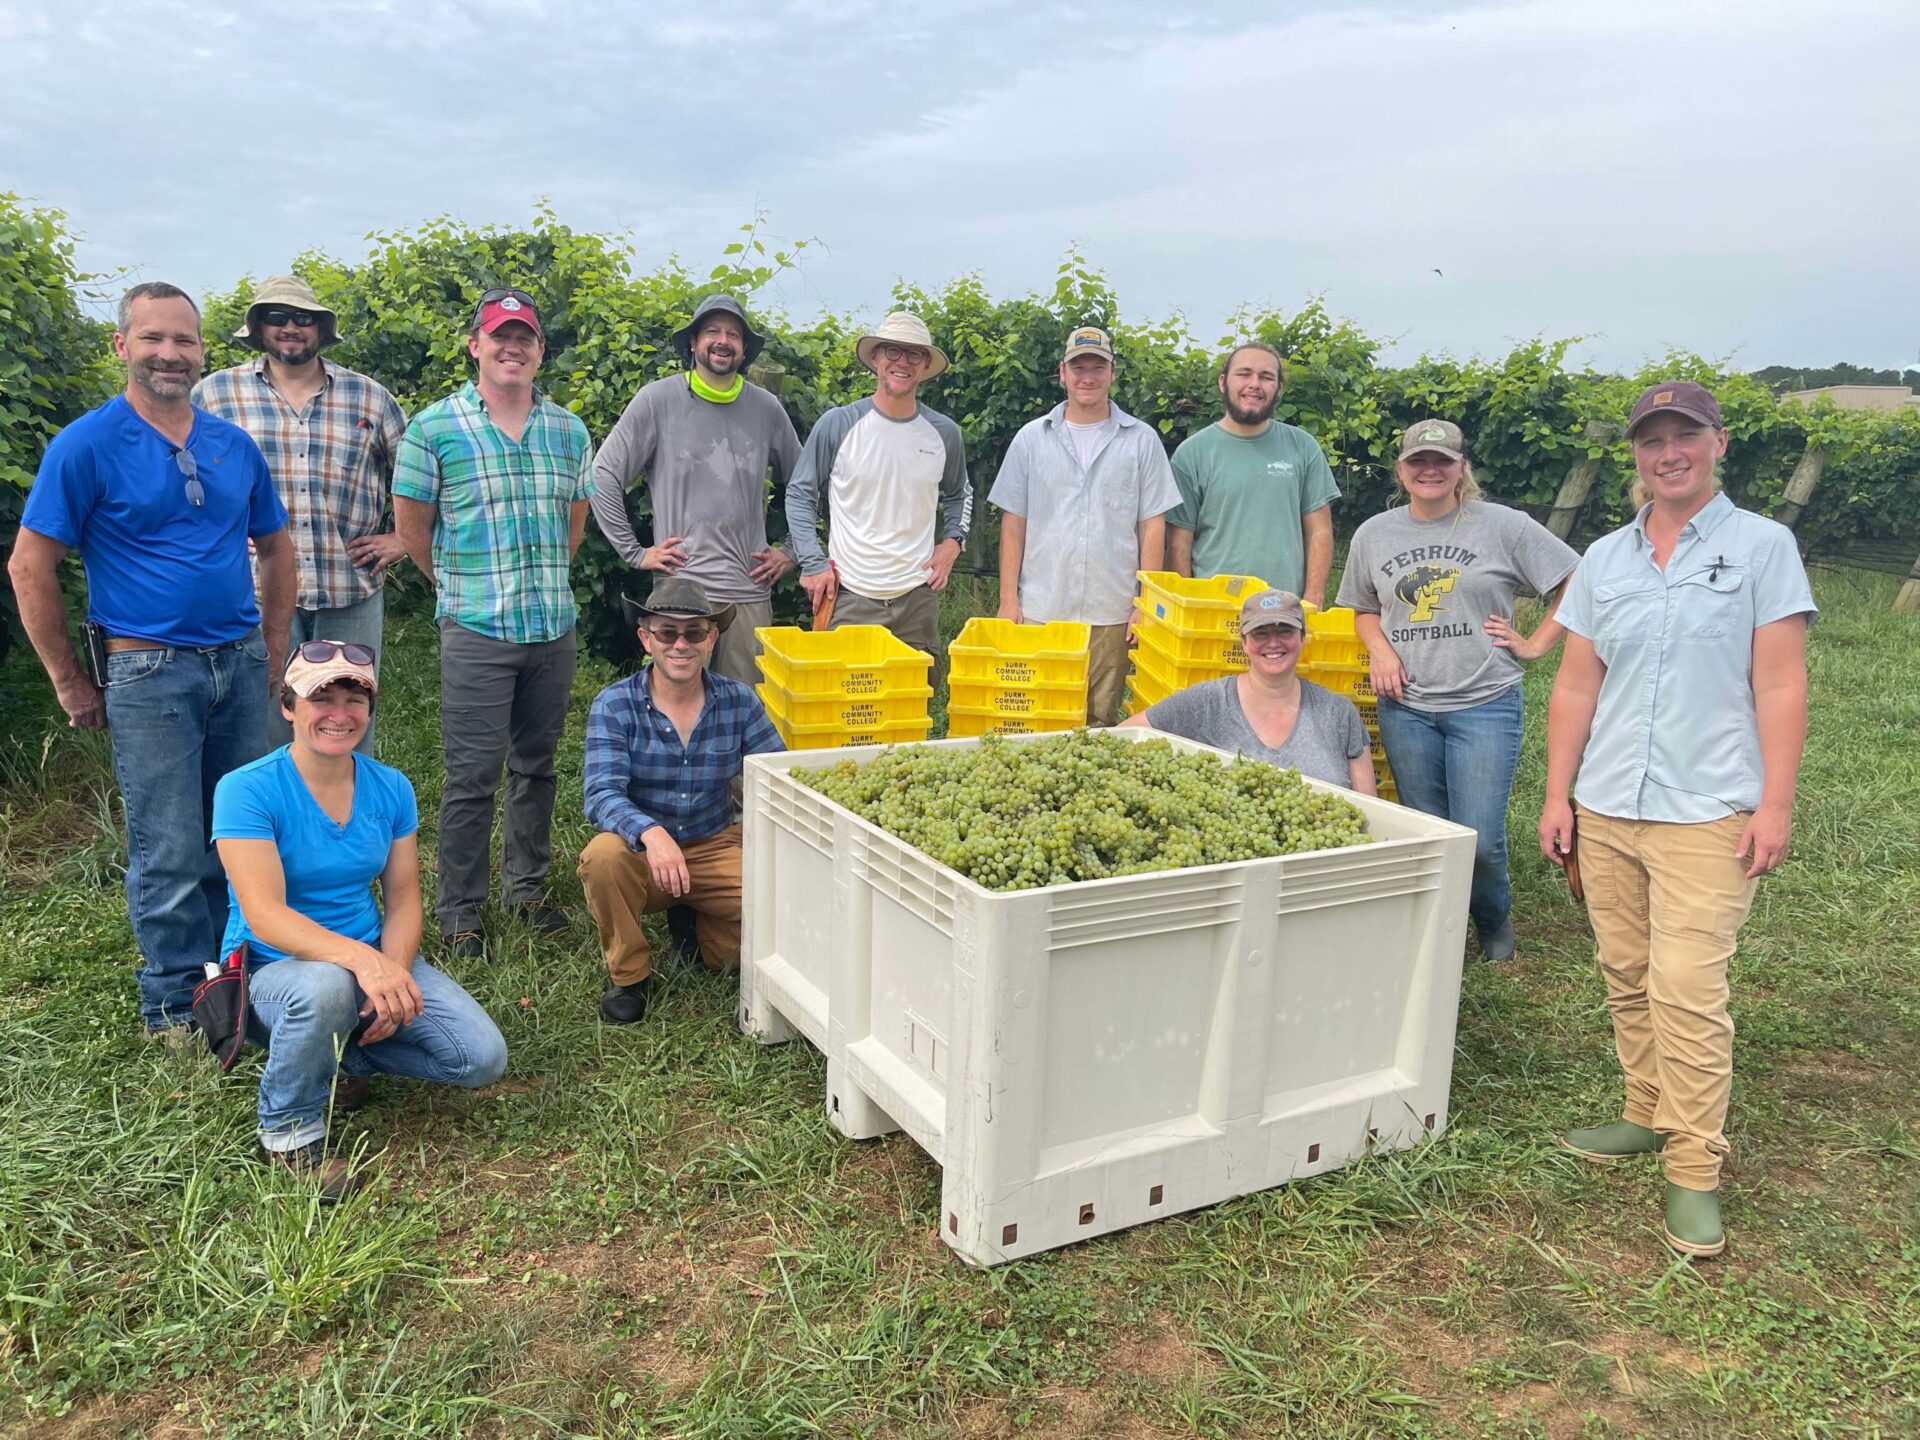 The 2021 Harvest Class at Surry Community College experienced their first harvest from the Watson Trellis System with the variety Traminette. The students in the class help with all aspects of harvest at the Surry Cellars Vineyard. Viticulture Instructor Sarah Bowman leads the class in lessons on different aspects of harvest logistics, harvest organization, and when the fruit is ripe and ready for harvest for particular styles of wine.